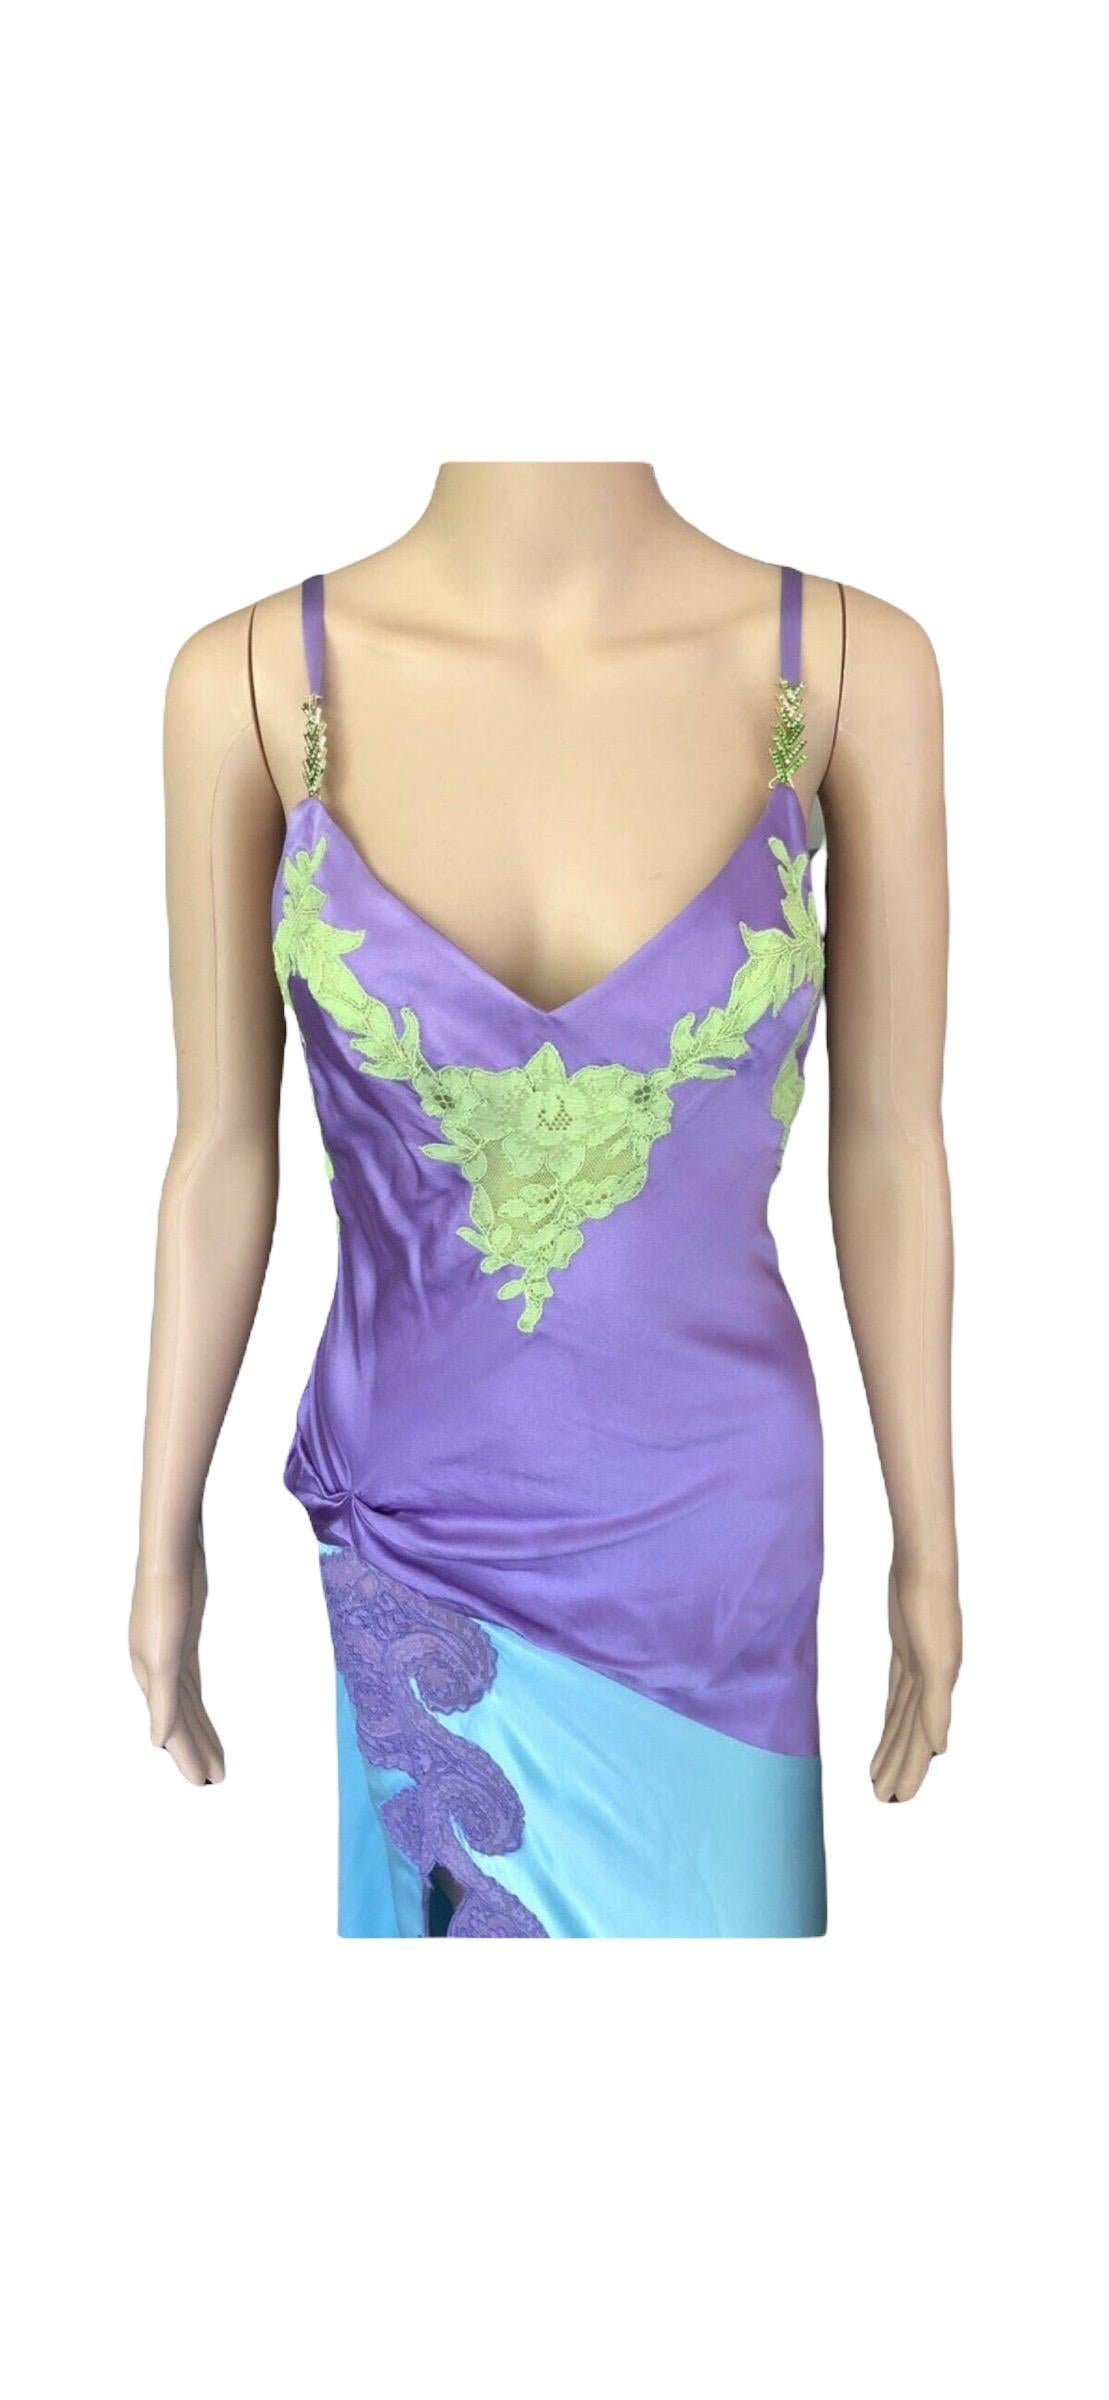 Gianni Versace F/W 1996 Runway Vintage Iconic Silk Dress Gown  5